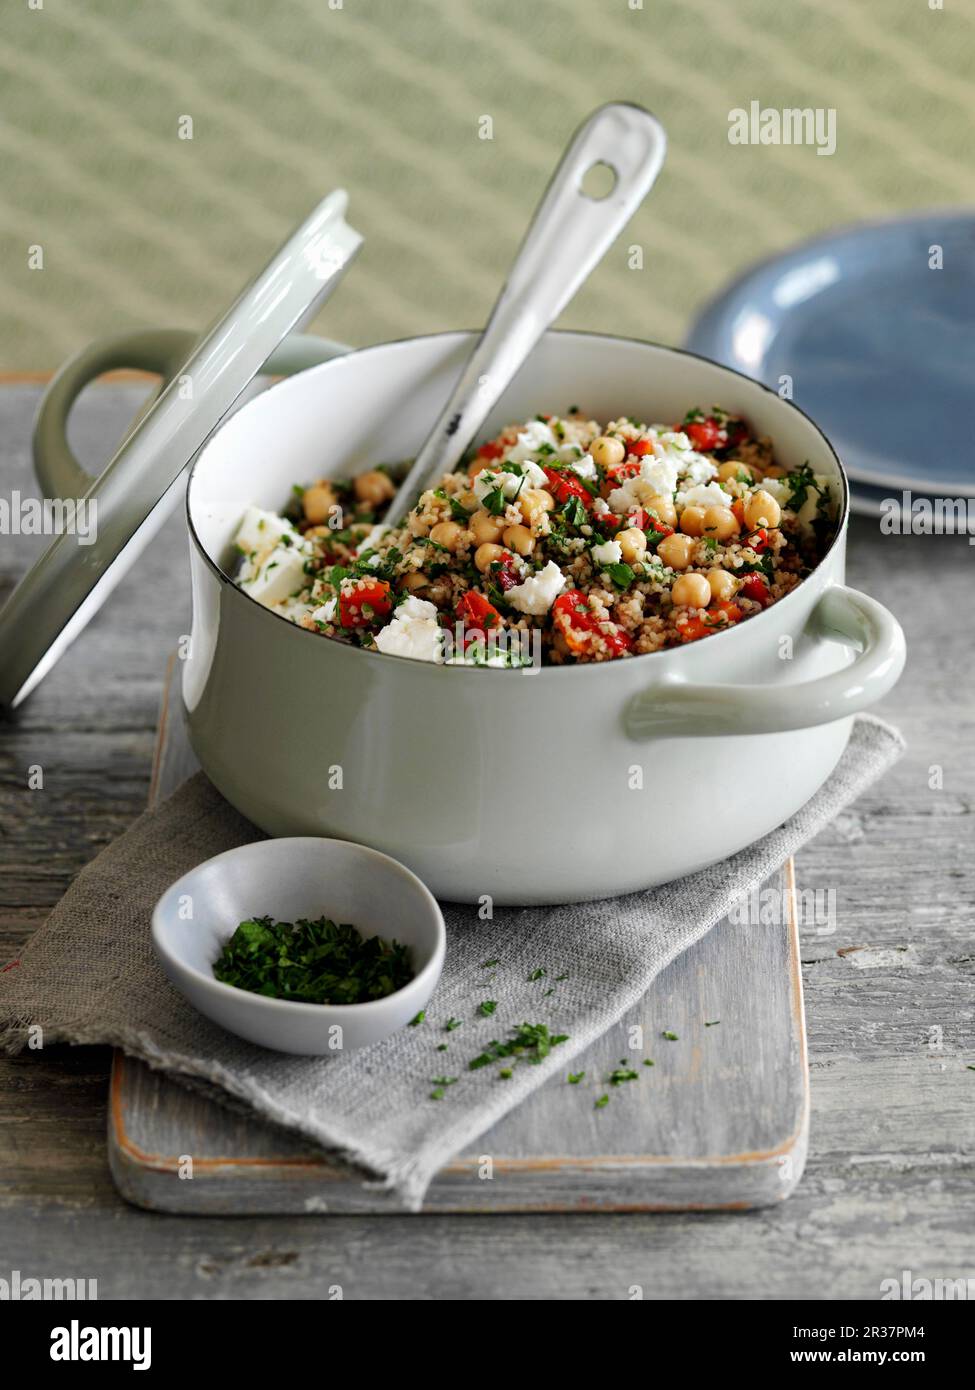 Pilau with chickpeas and feta Stock Photo